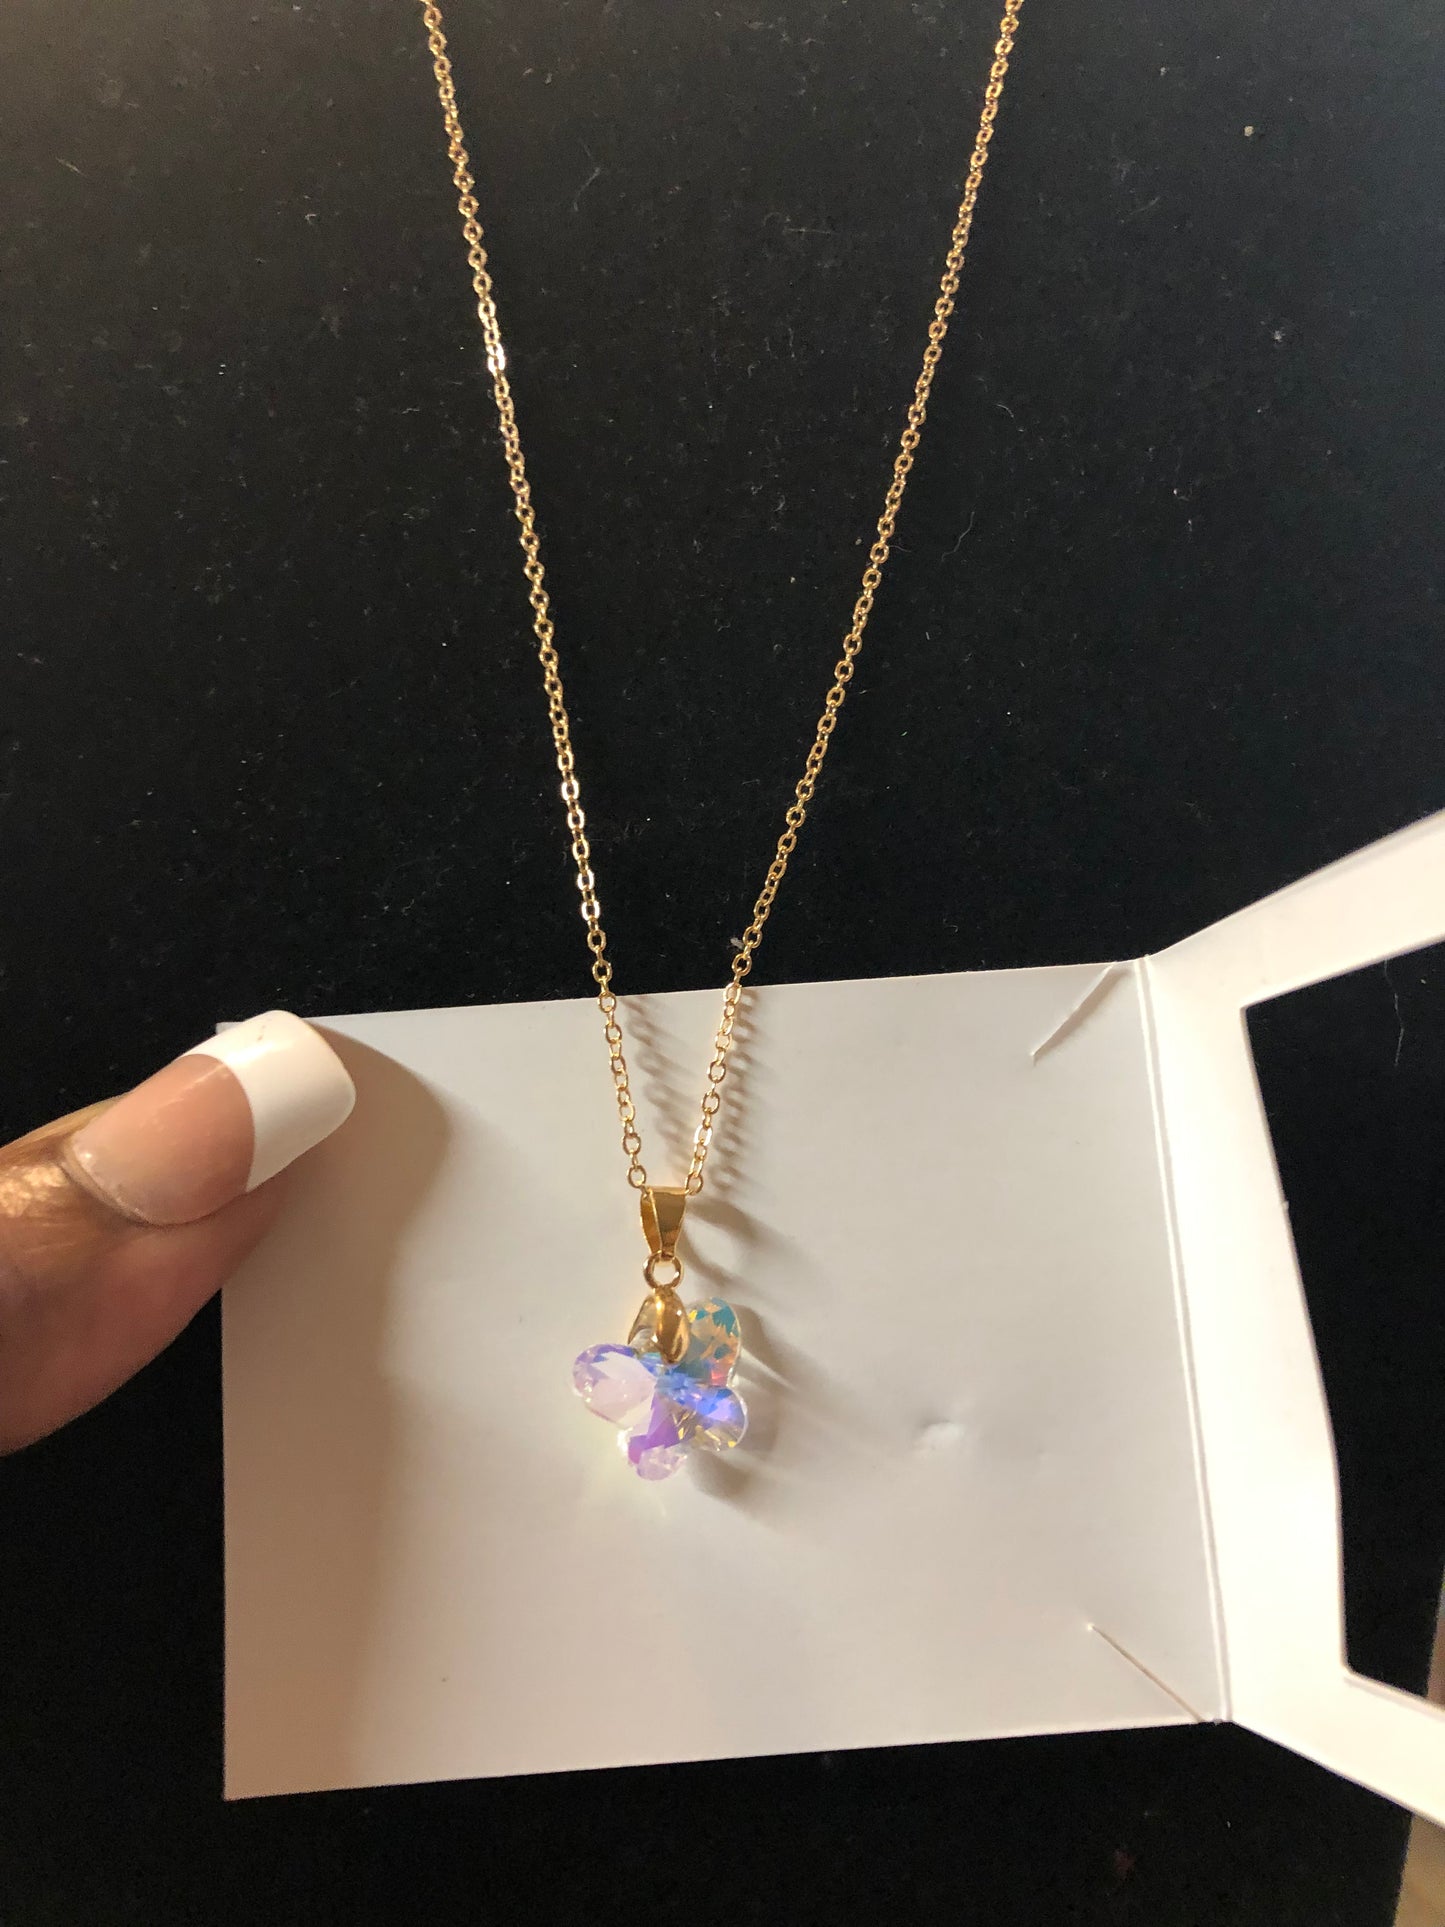 Woman Fashion Crystal Clear Tricolor Butterfly Necklace On A Gold Chain. Great For Someone Special.